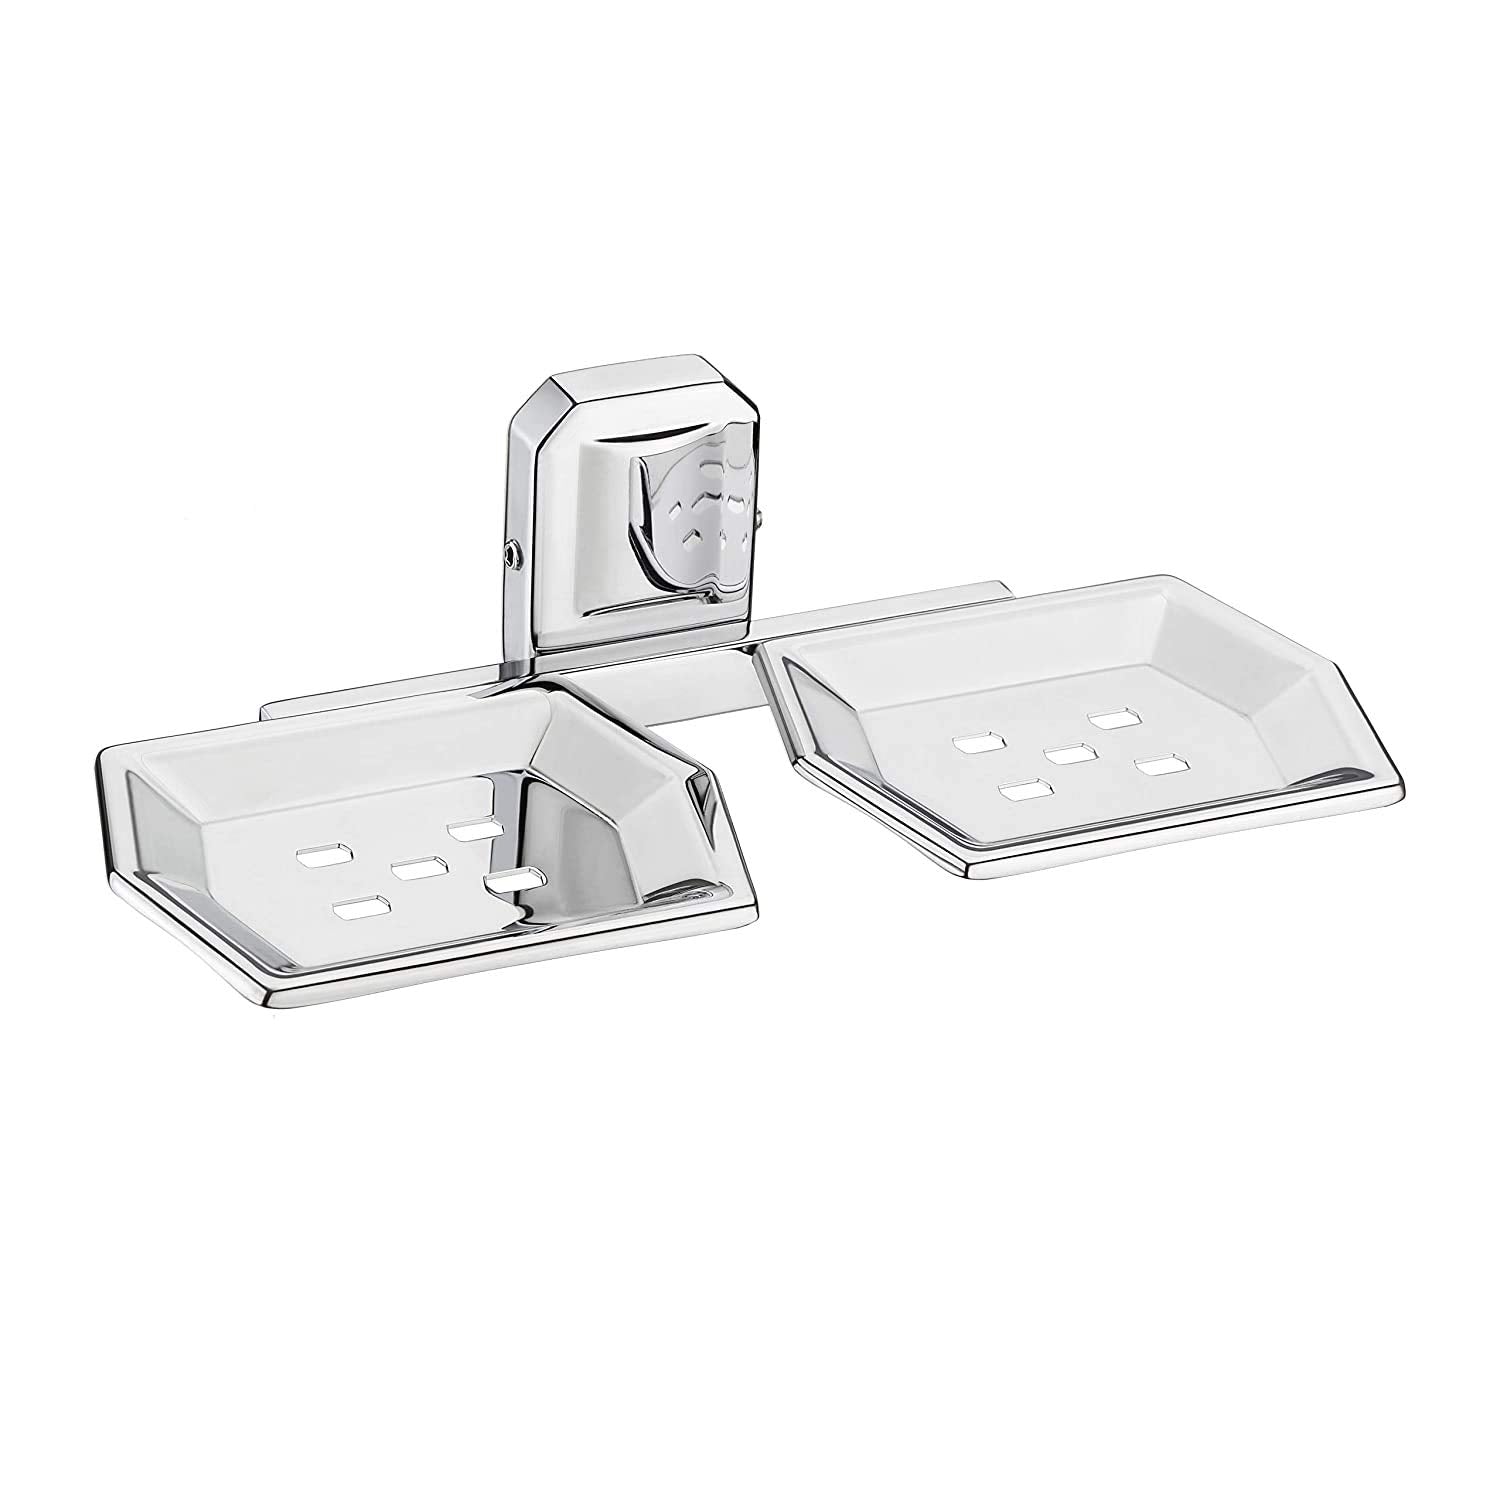 Plantex Stainless Steel 304 Grade Cute Soap Holder for Bathroom/Soap Dish/Bathroom Soap Stand/Bathroom Accessories(Chrome) - Pack of 3